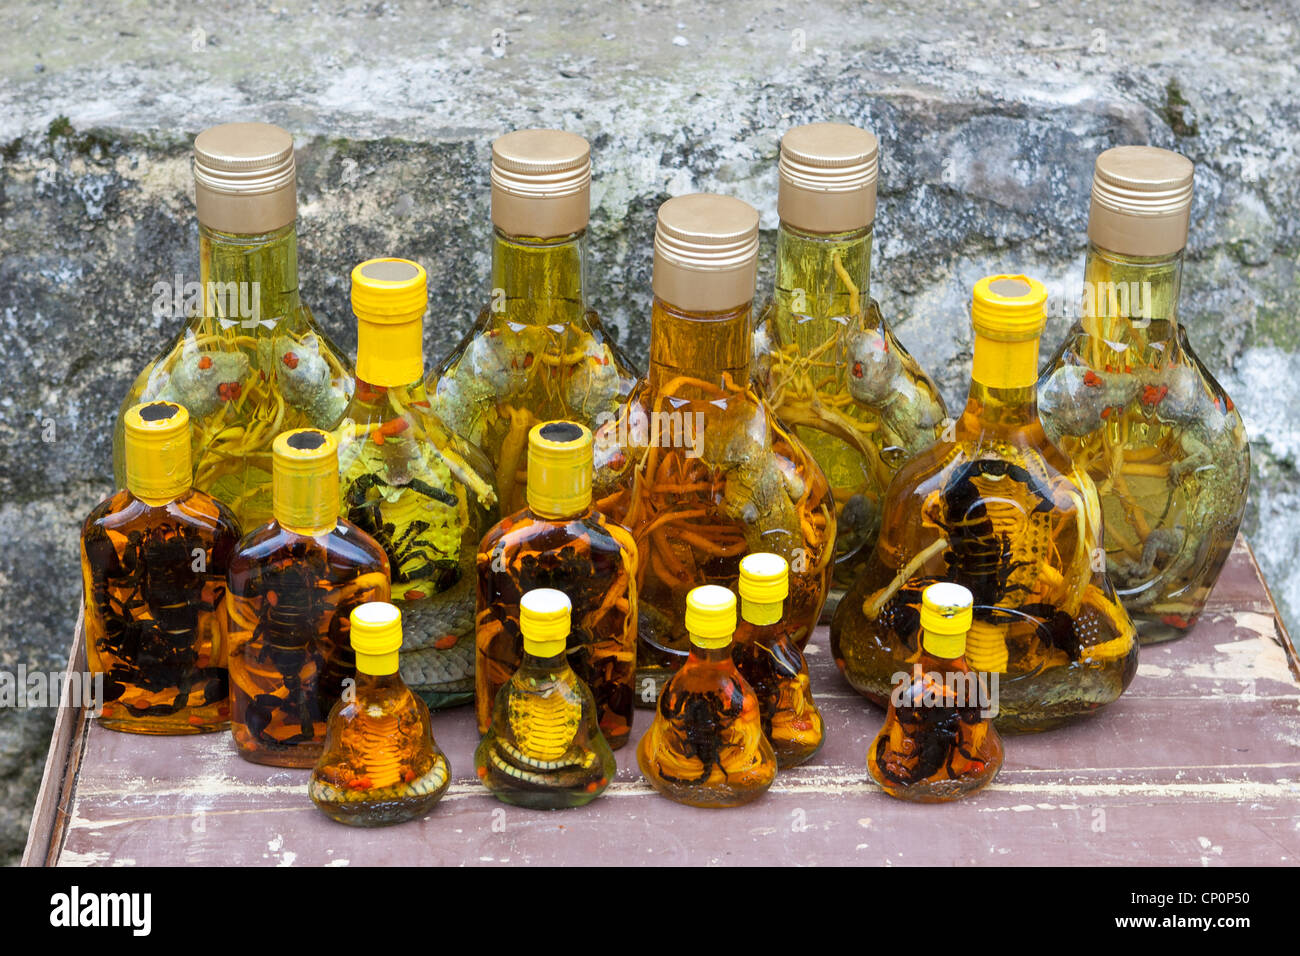 Snake wine - snakes, scorpions and other venomous animals steeped in alcohol along with herbs as a Chinese traditional medicine. Stock Photo